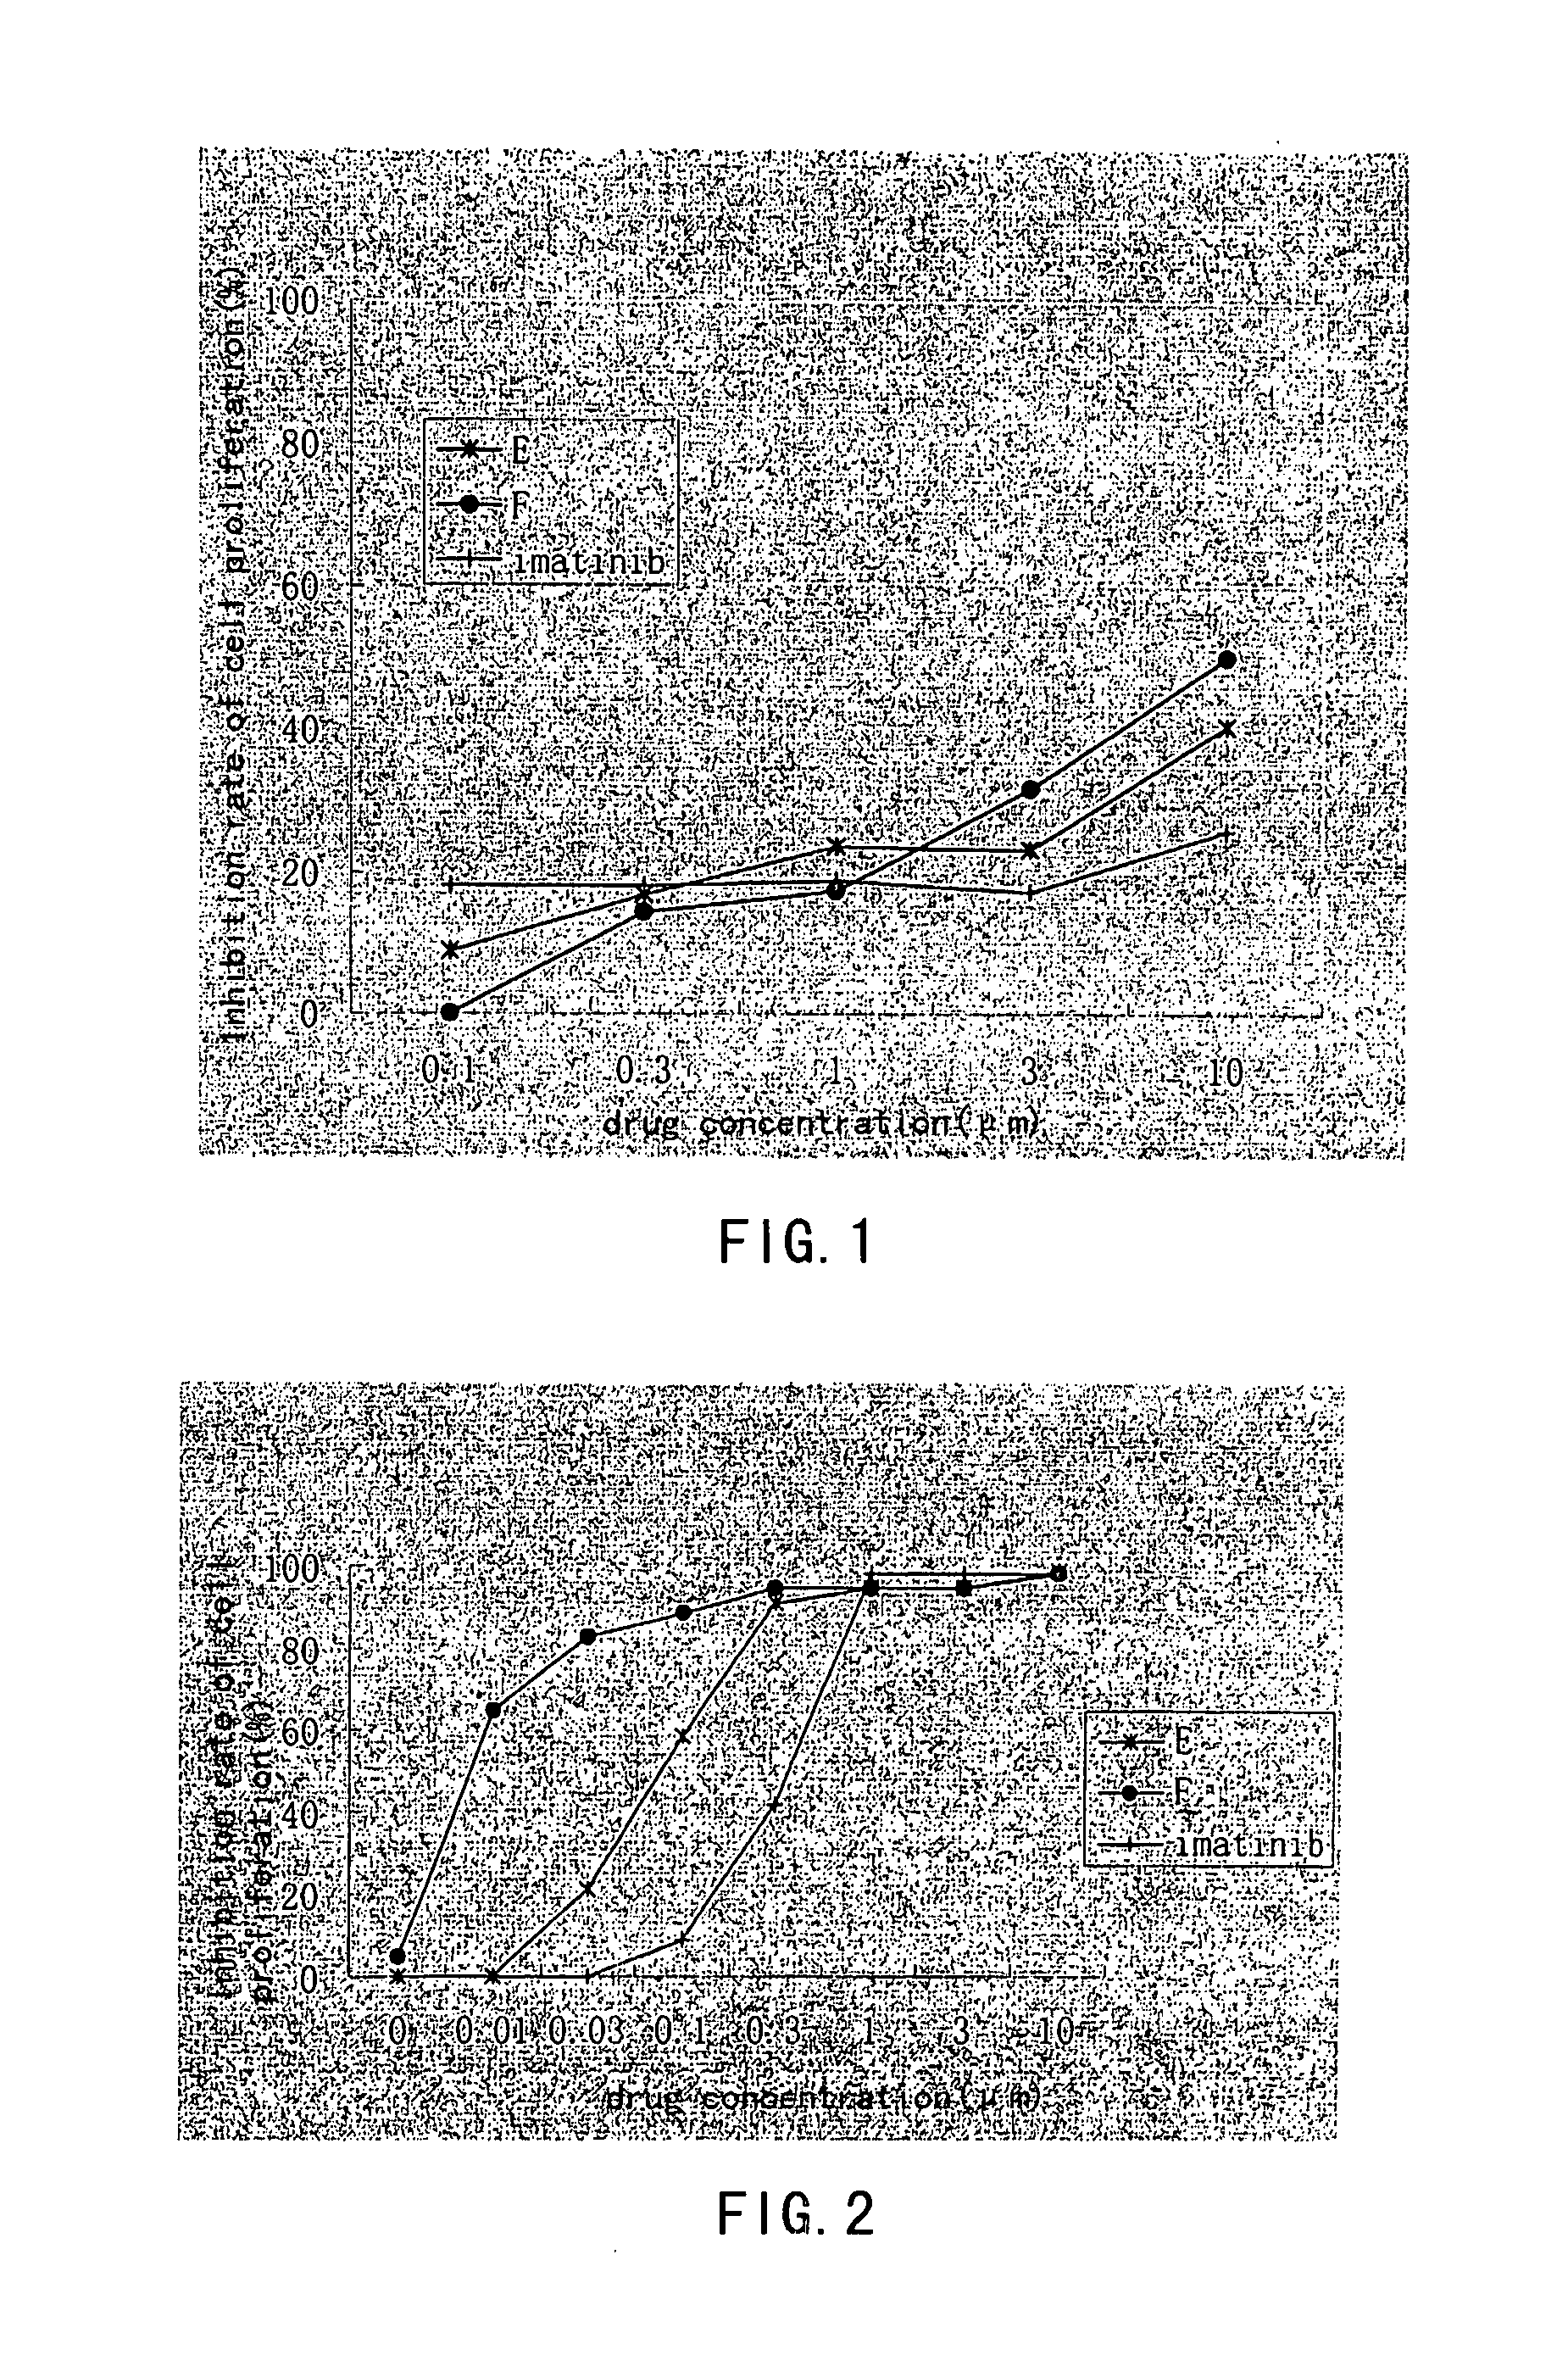 Aminopyrimidine Compounds and Their Salts, Process for Preparation and Pharmaceutical Use Thereof